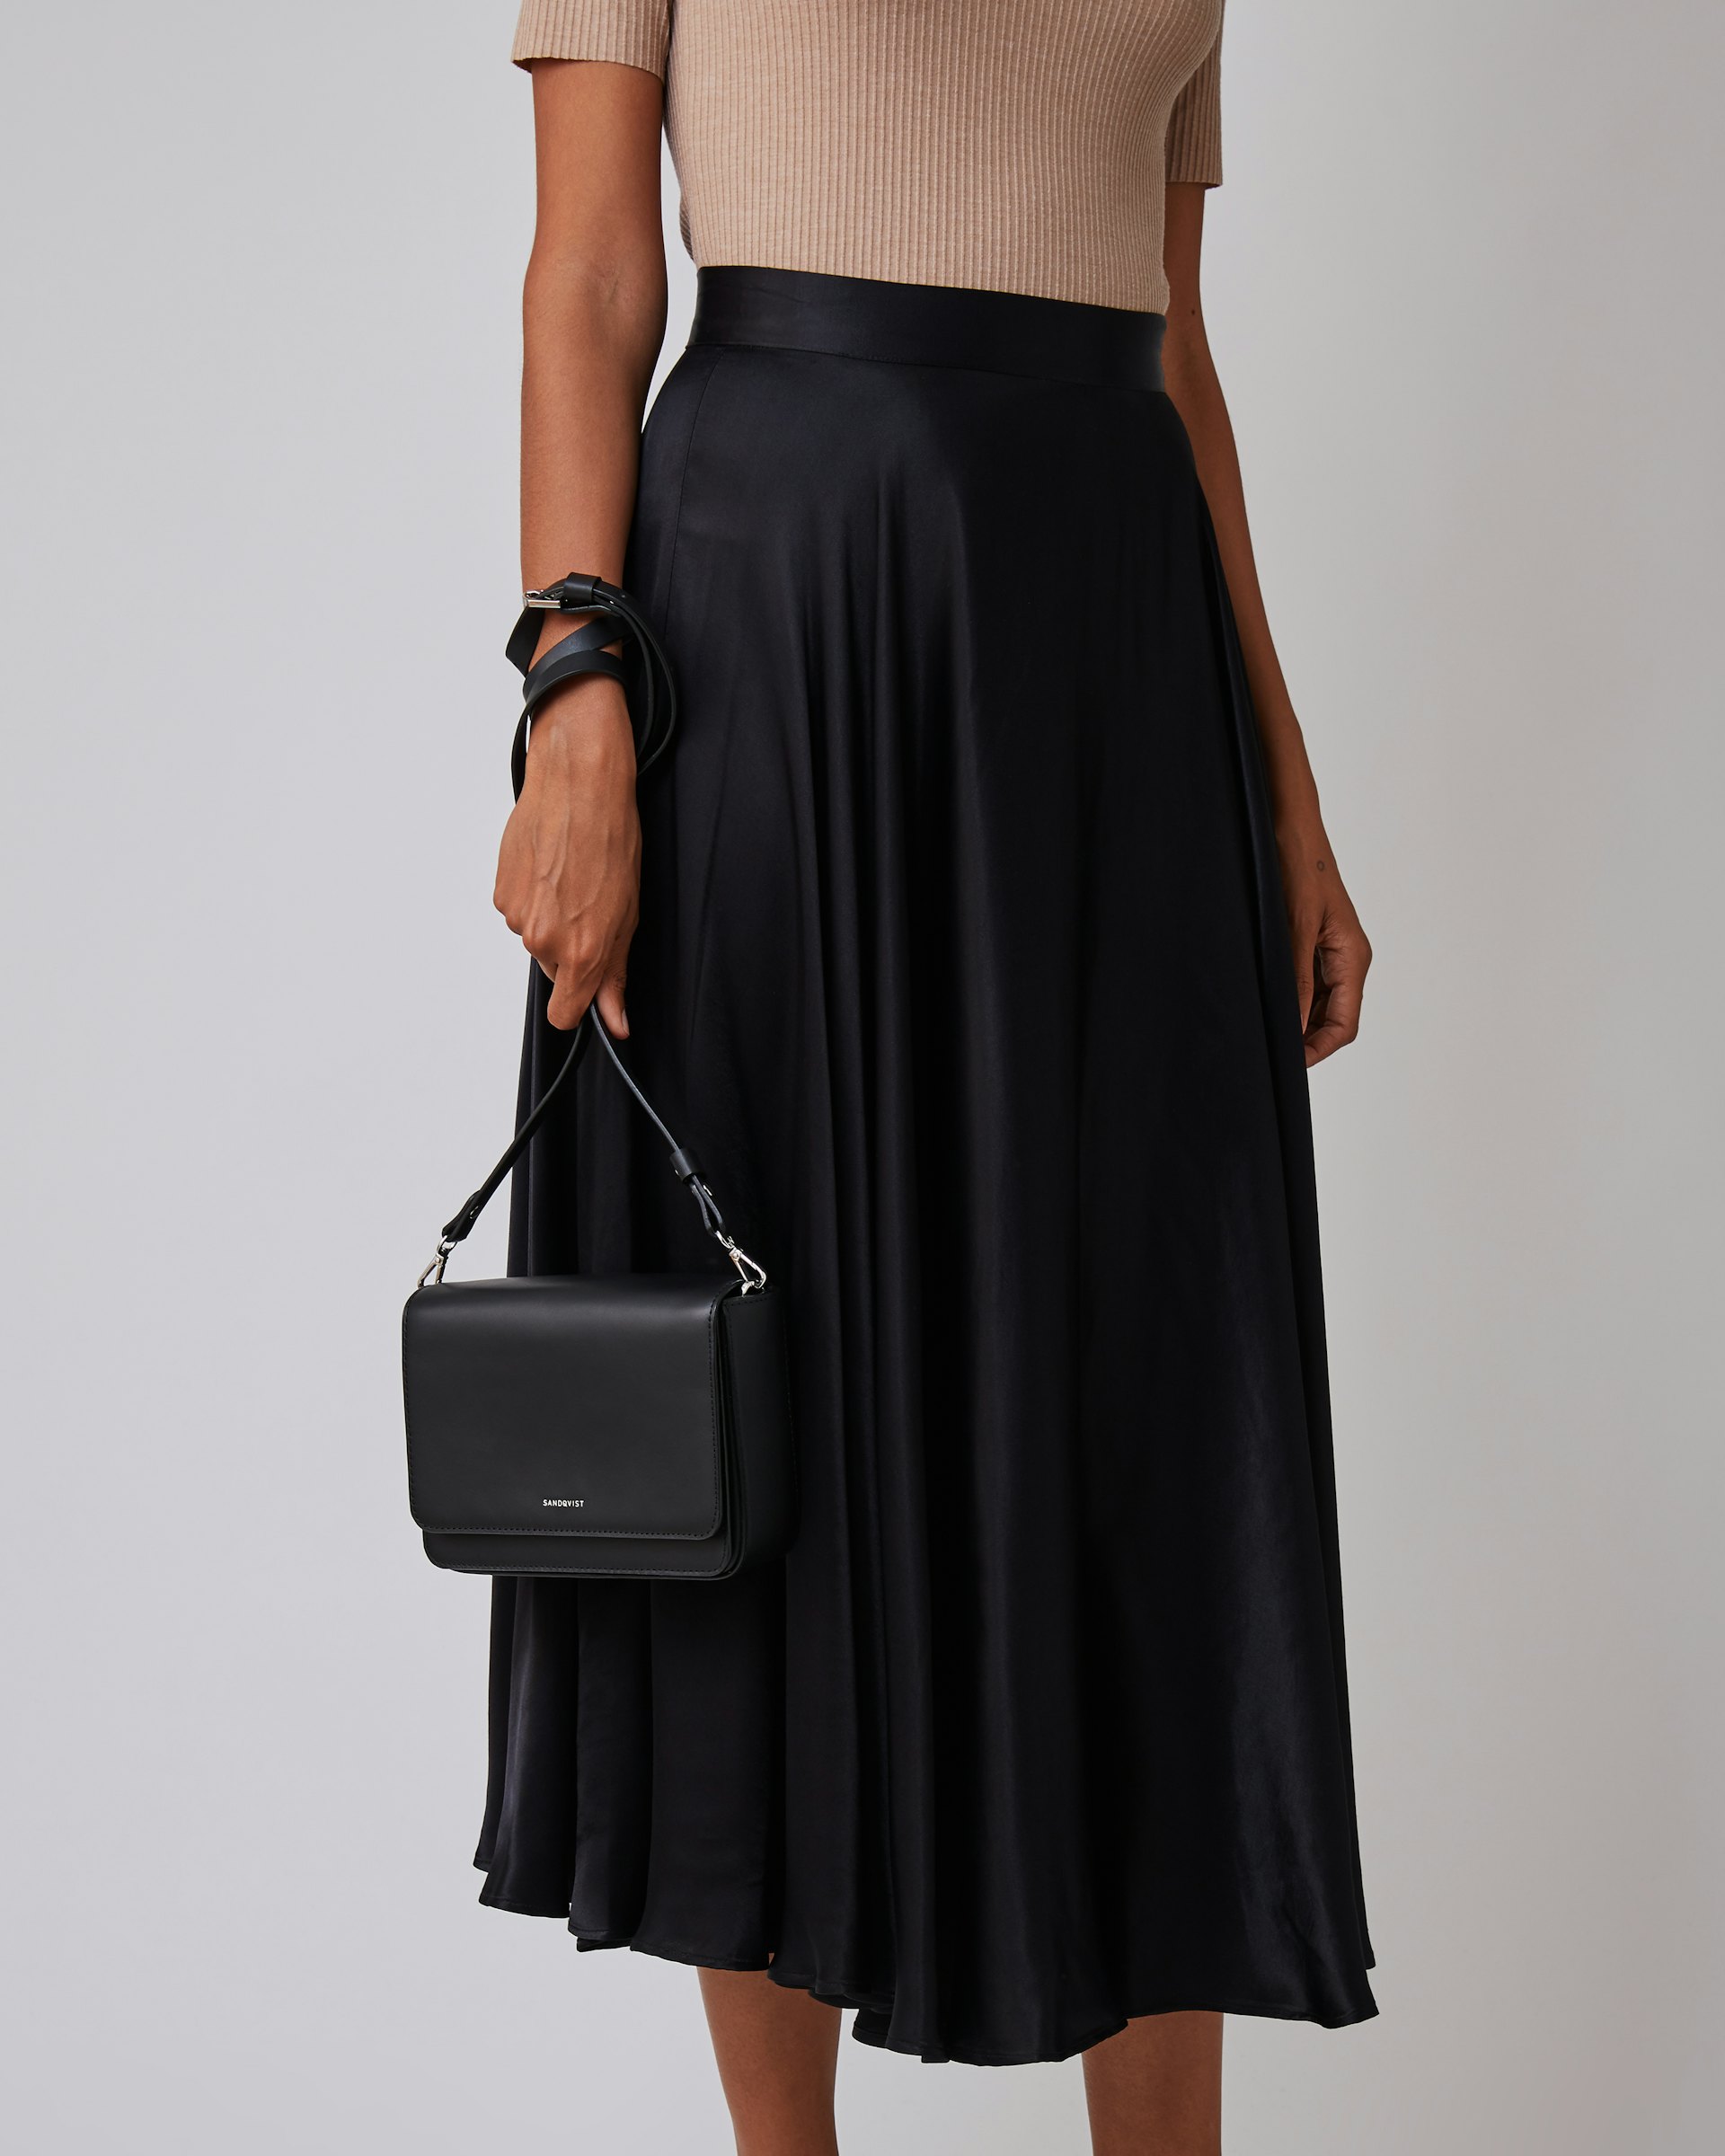 Alma belongs to the category Shoulder bags and is in color black (4 of 4)